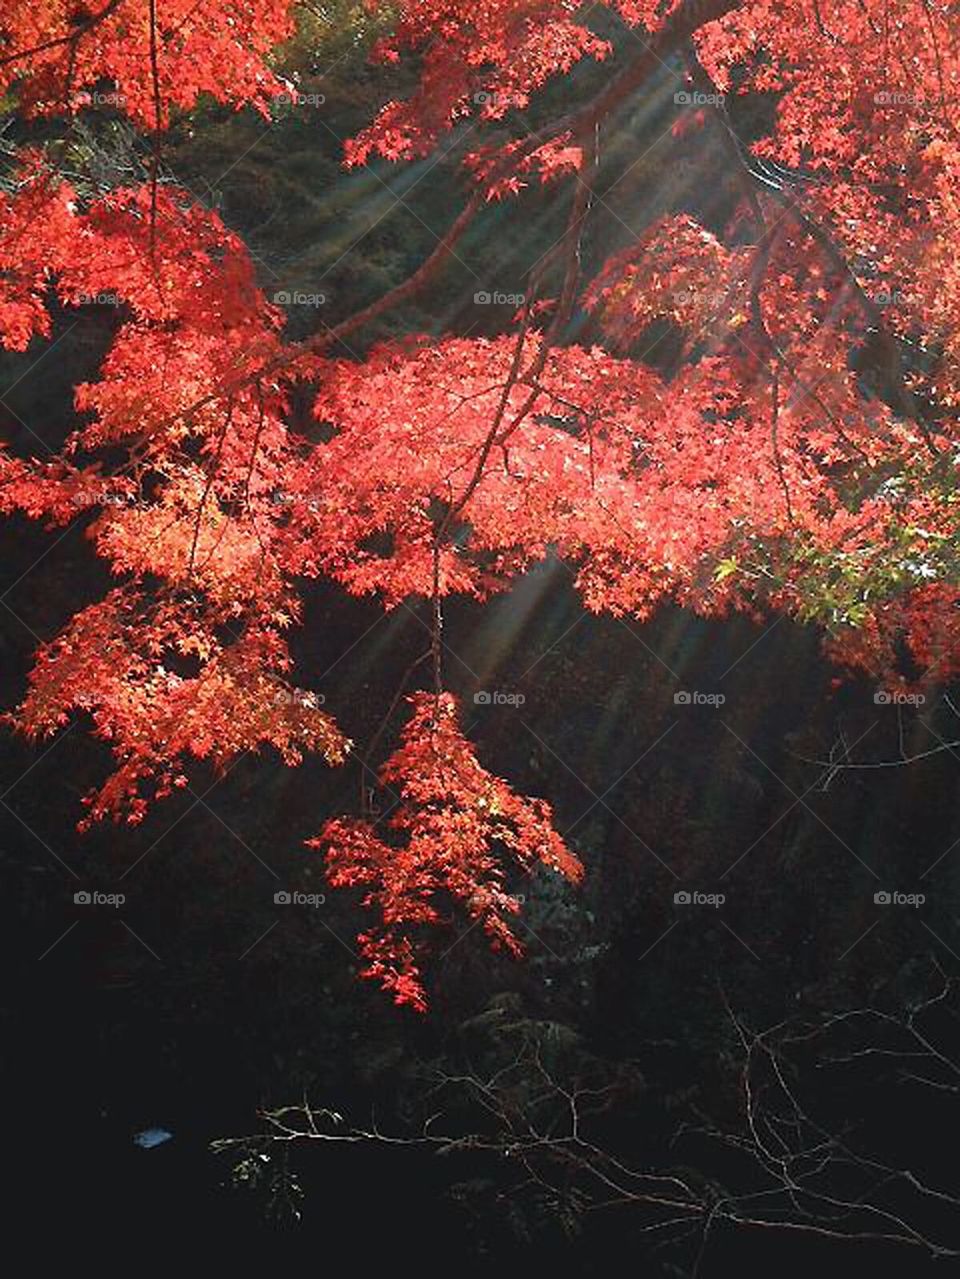 red reaves in Kyoto